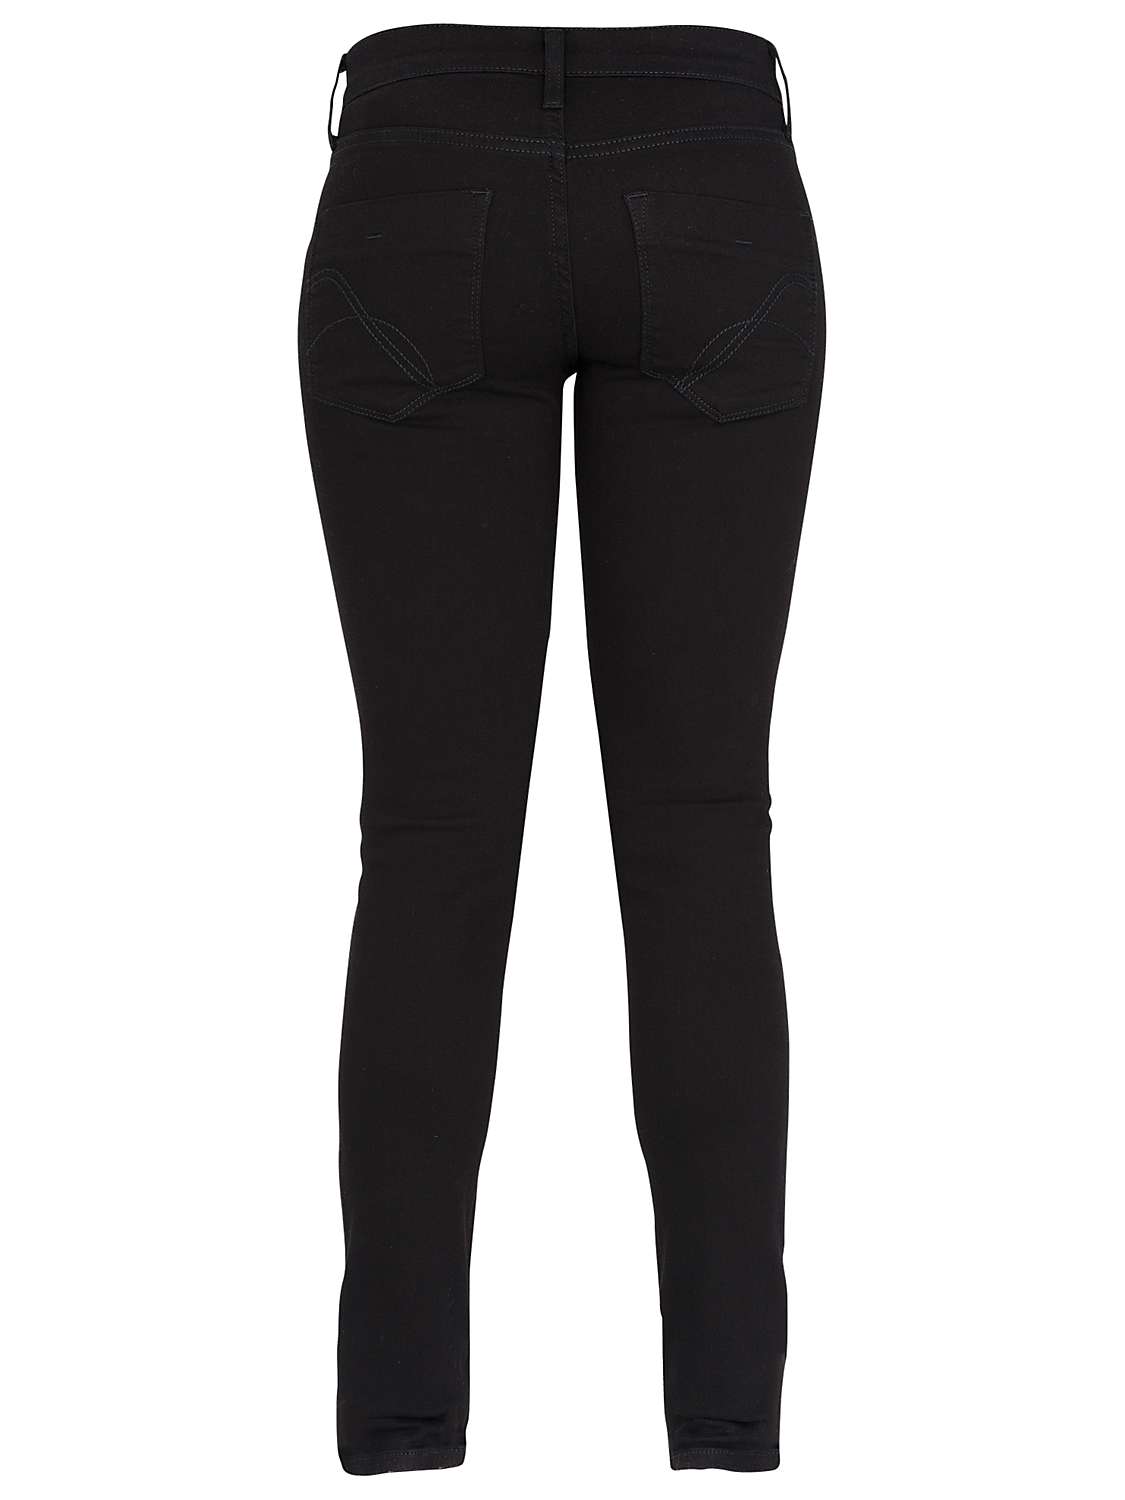 Buy French Connection Skinny Stretch Denim Jeans Online at johnlewis.com